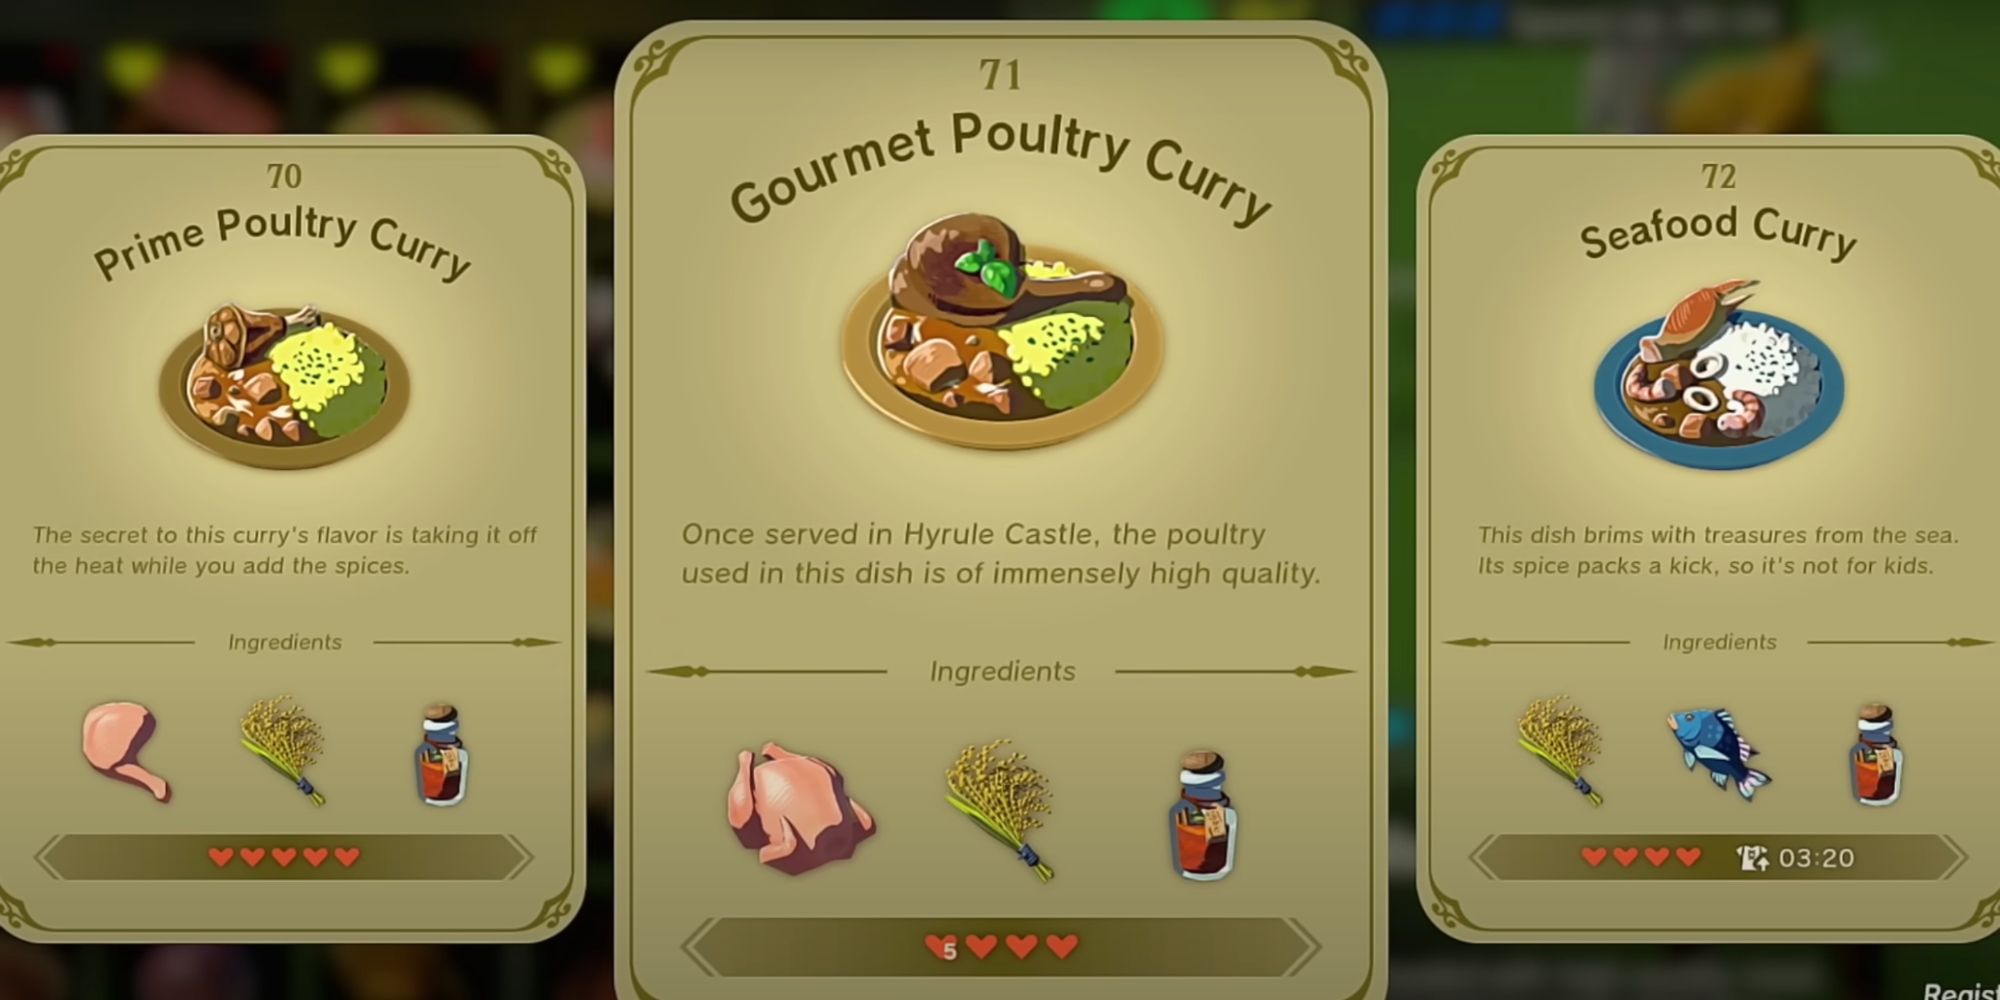 A recipe for Gourmet Poultry Curry